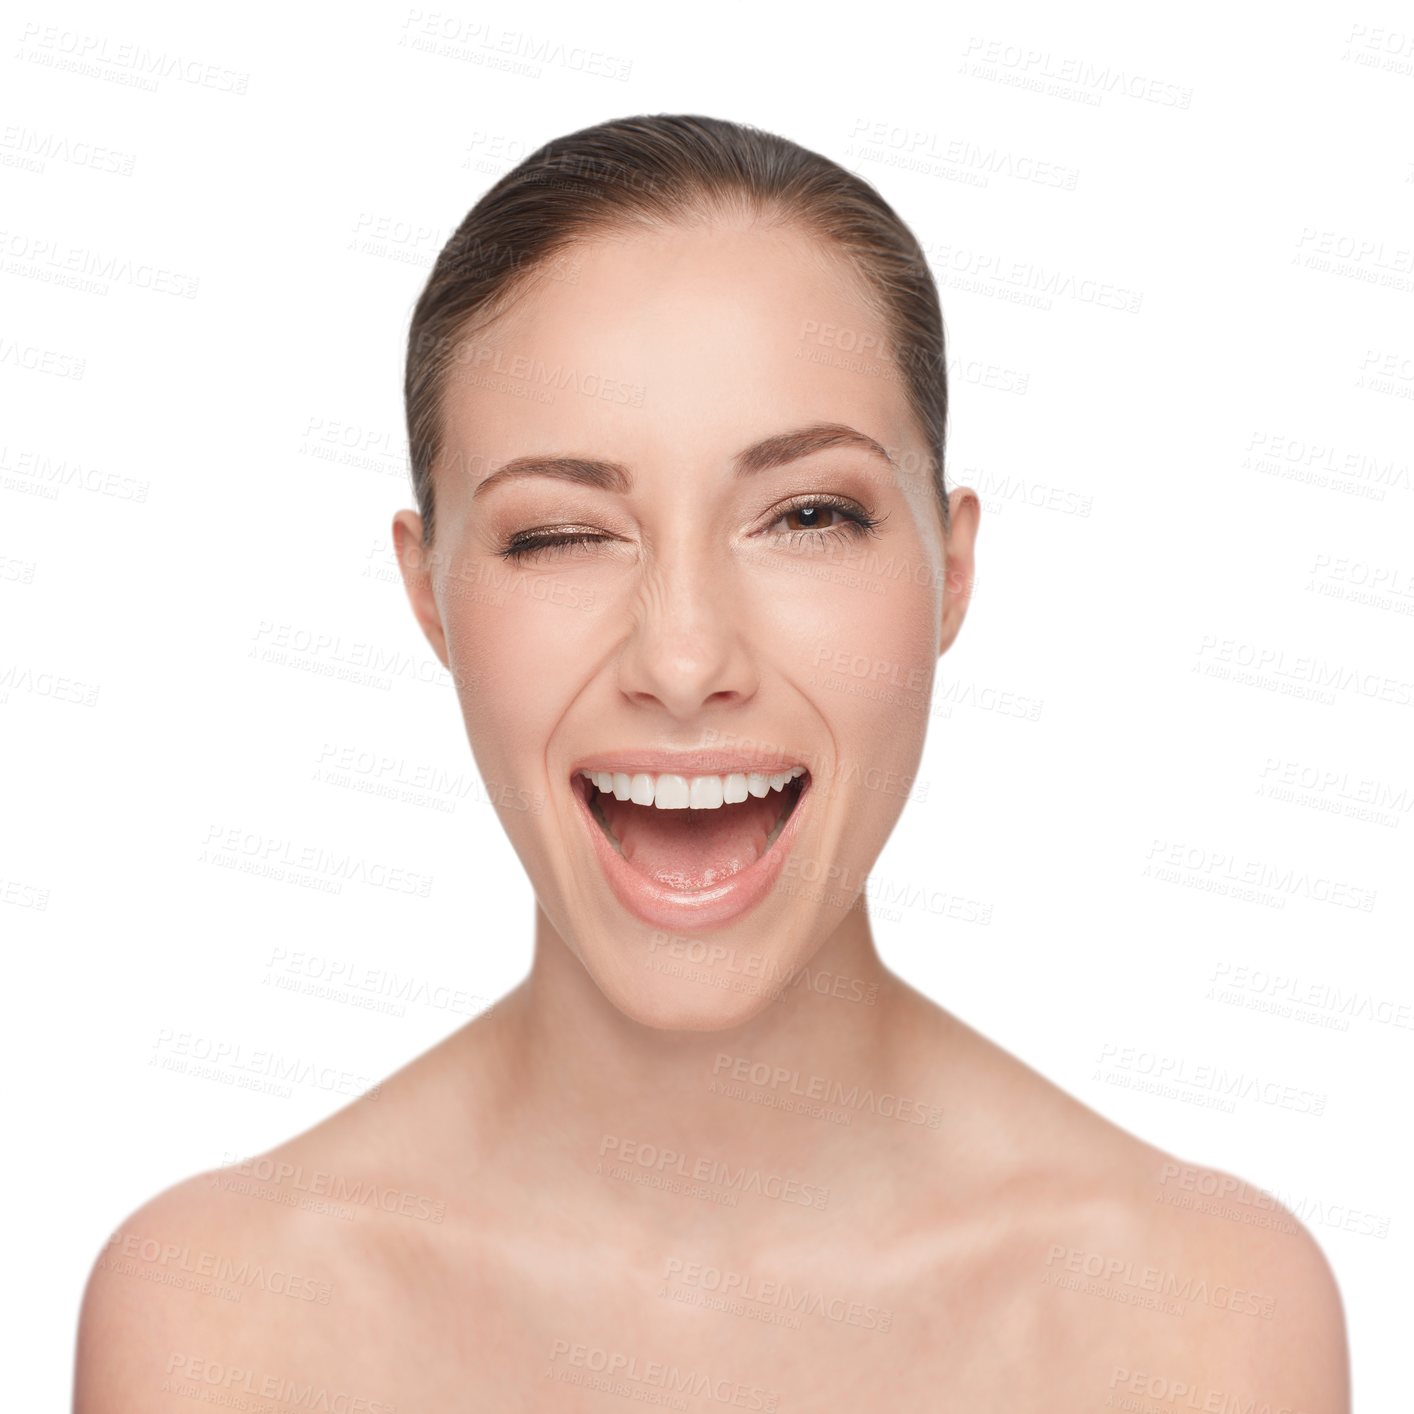 Buy stock photo Skincare, beauty and face of a woman with a happy smile, wink and clean skin on a png, transparent and isolated or mockup background. Portrait of good hygiene, health and wellness